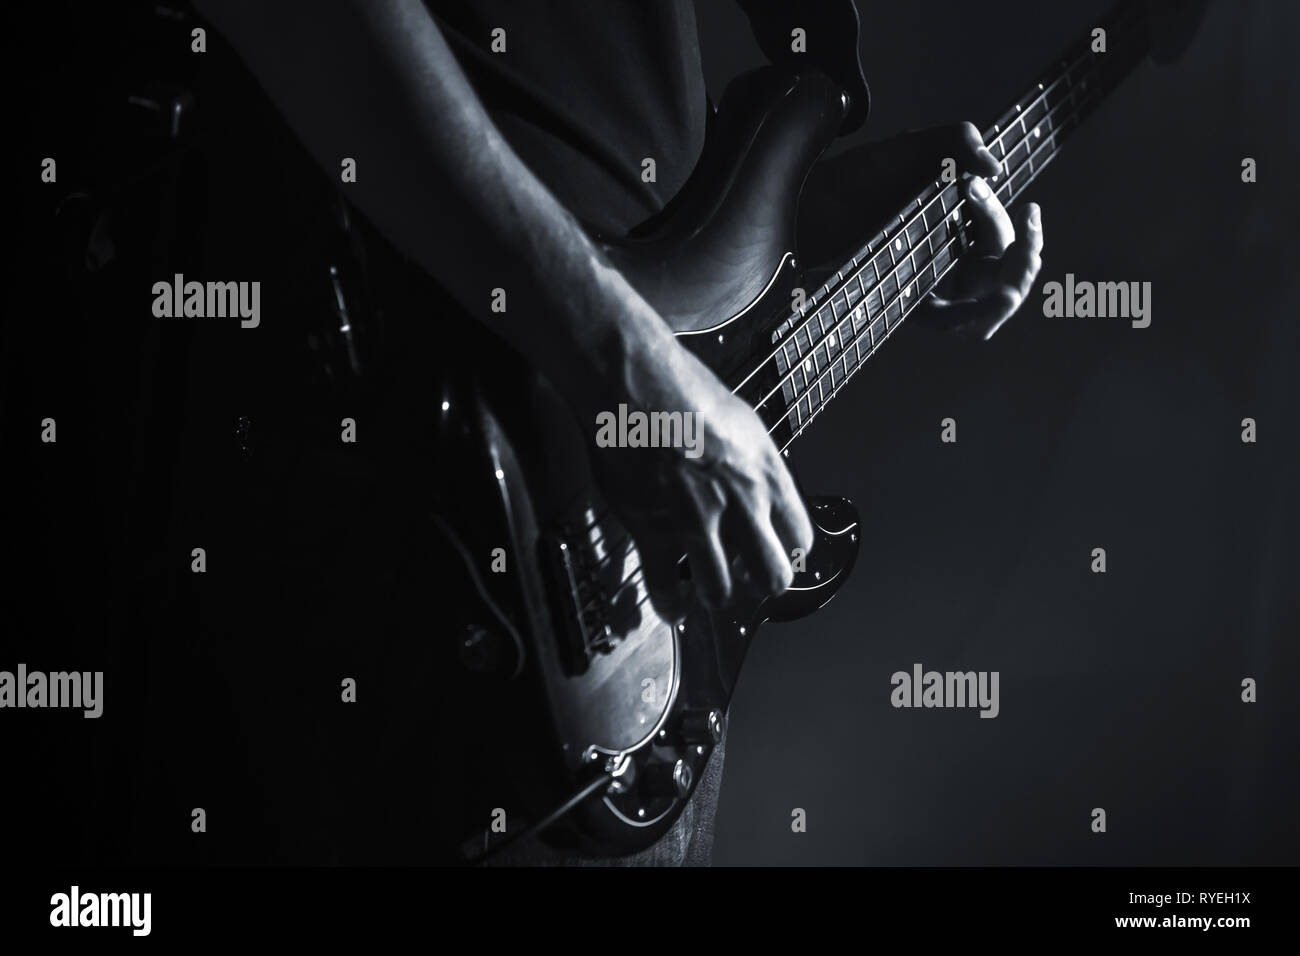 Electric bass guitar player hands, live music theme, close-up black and white photo Stock Photo